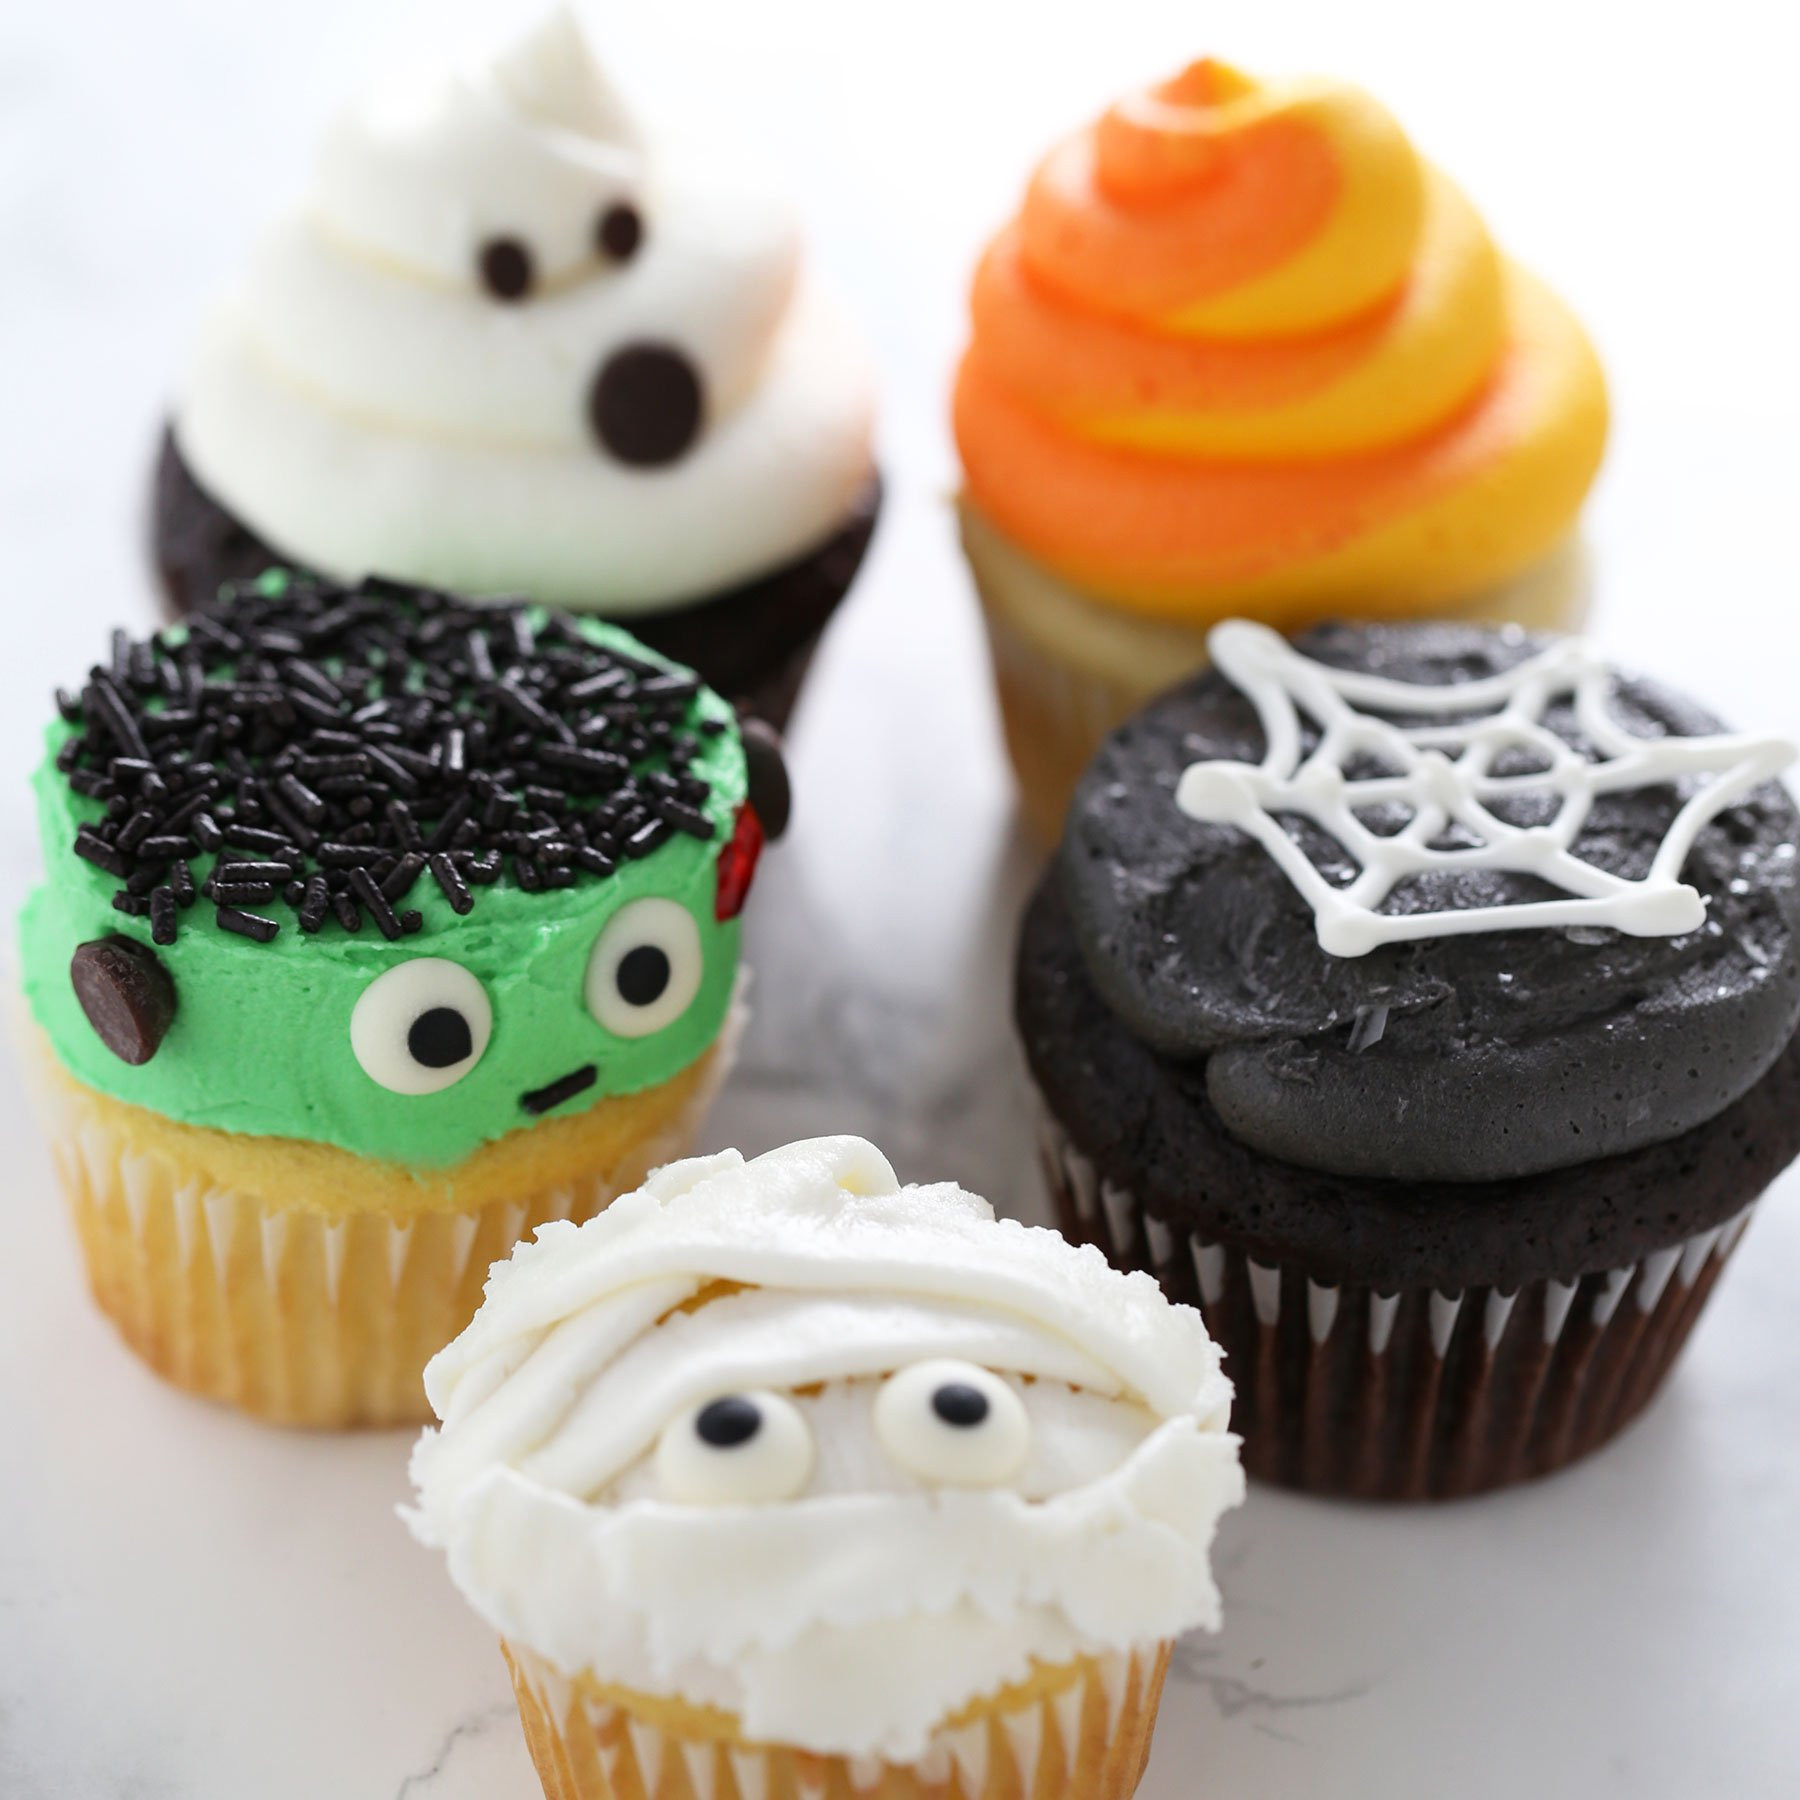 Cupcakes For Halloween
 How to Make Halloween Cupcakes Handle the Heat